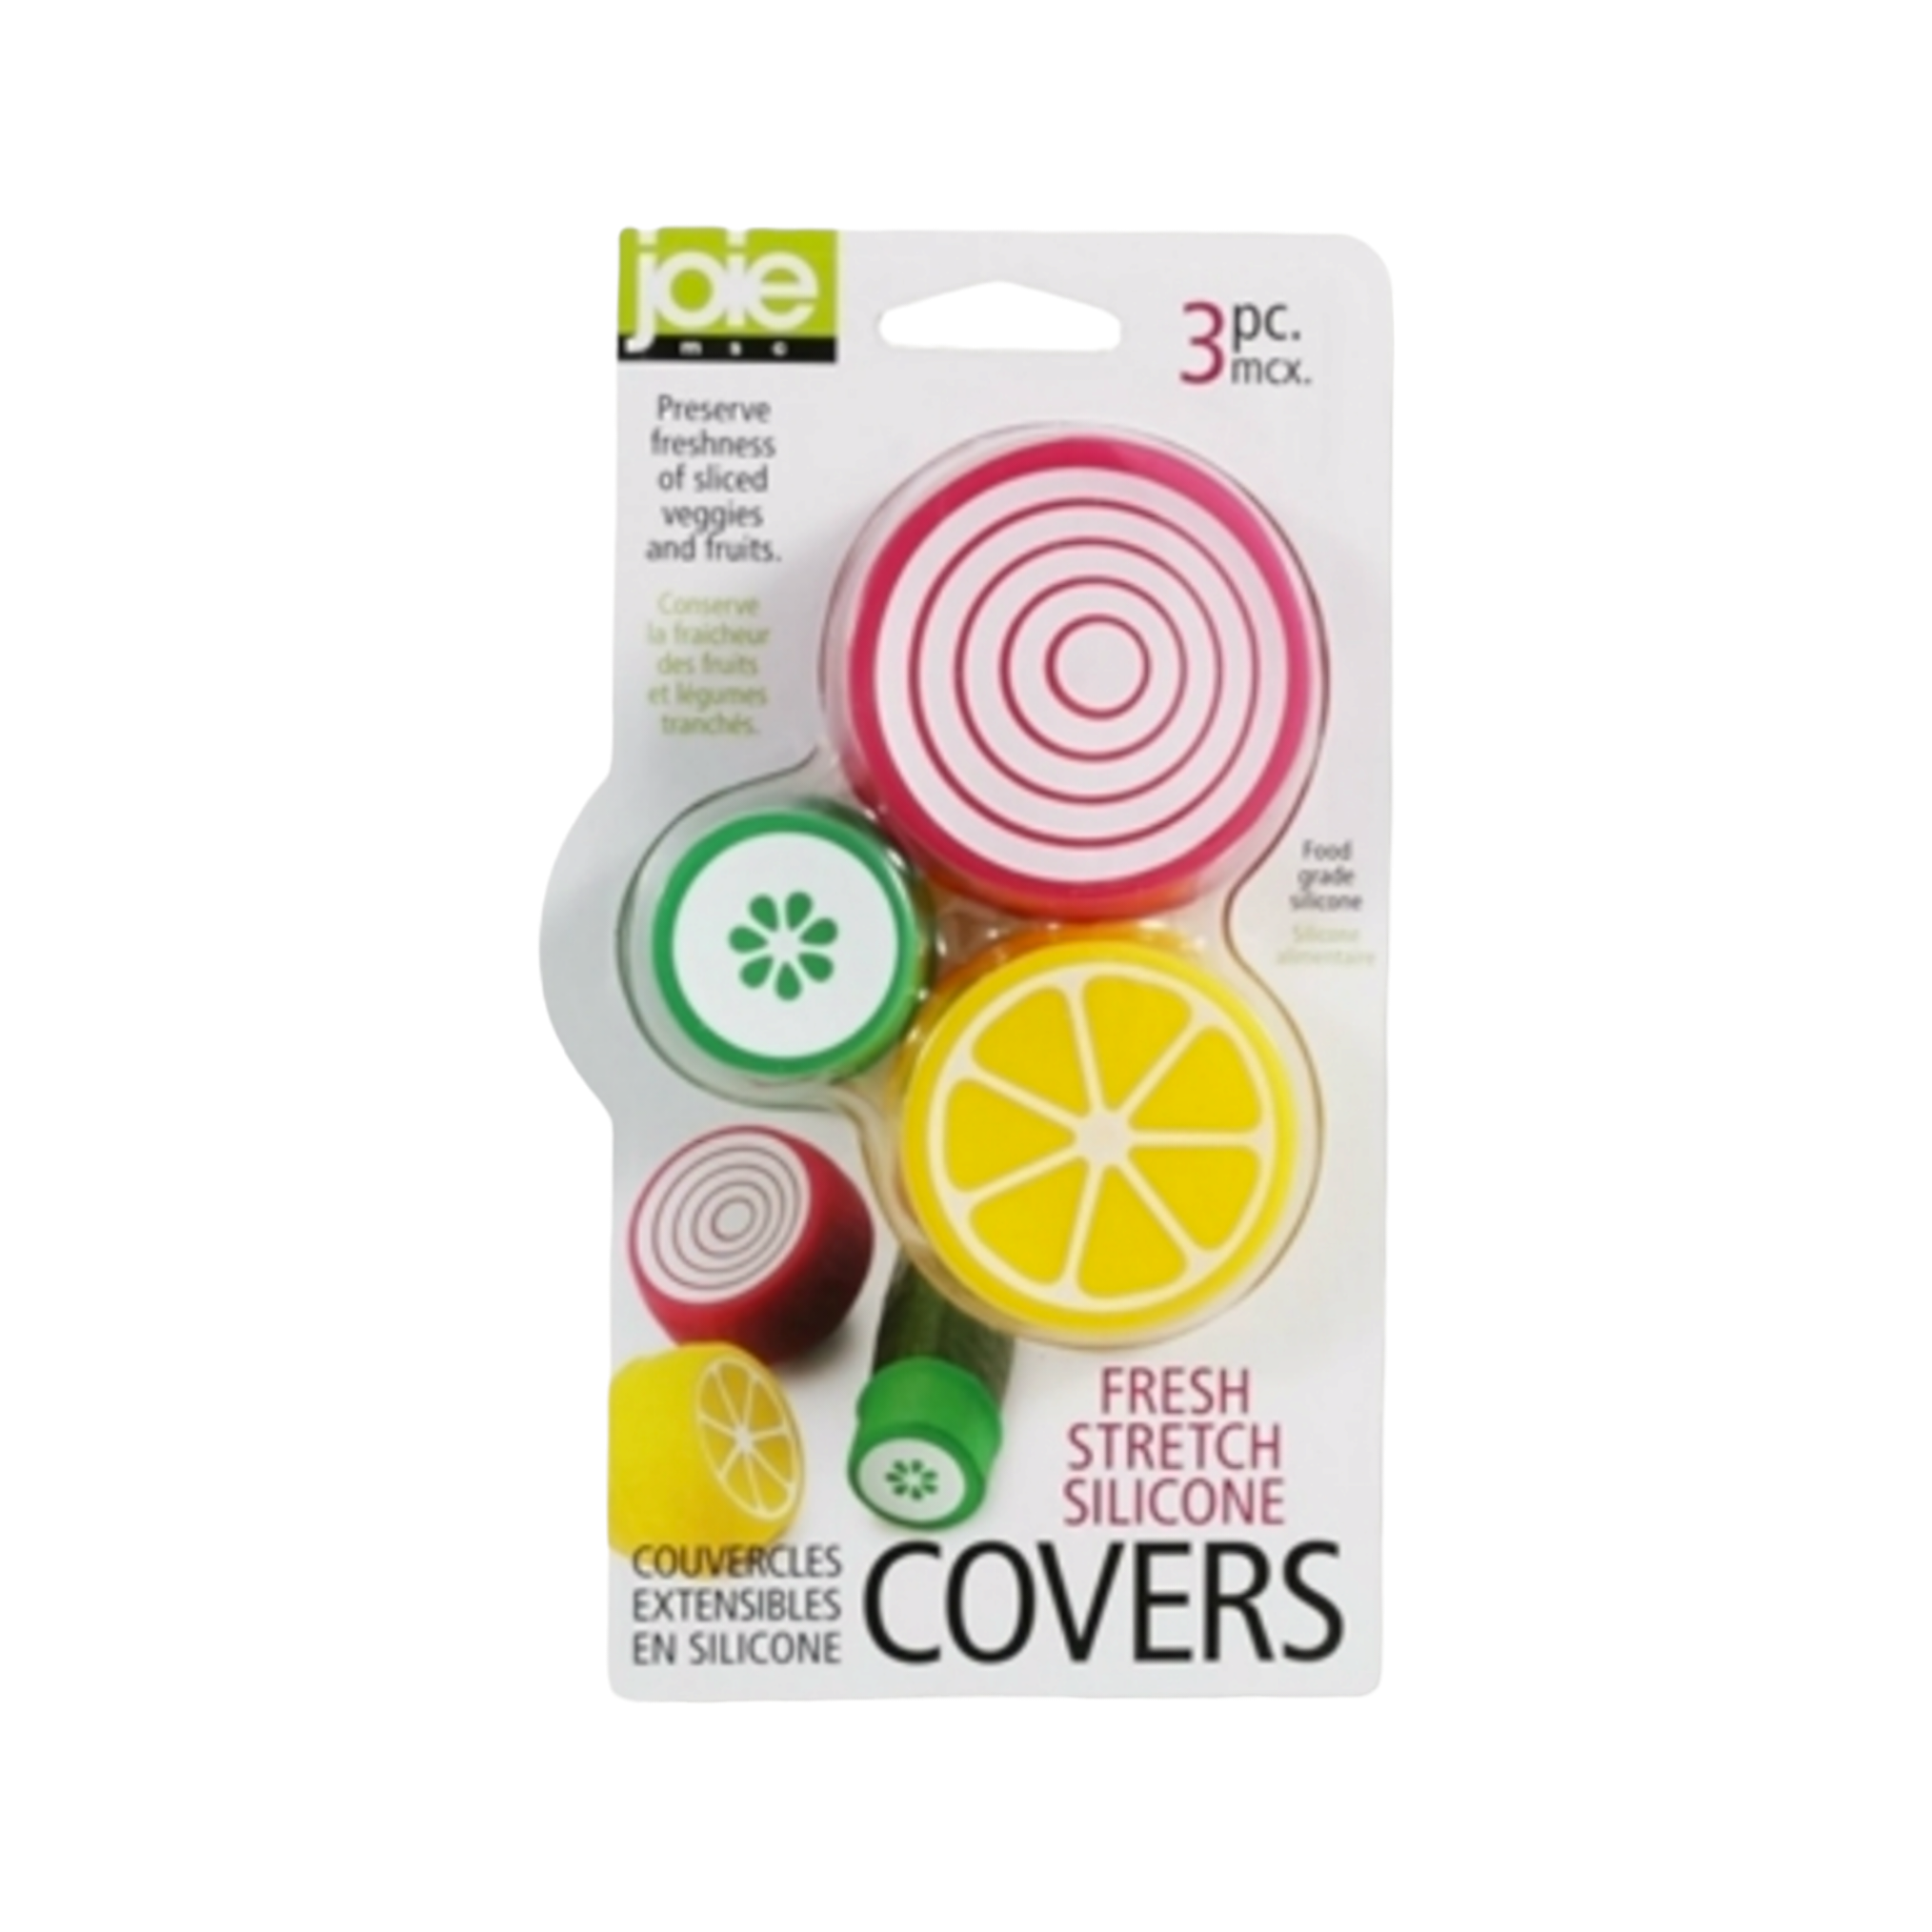 Joie Fresh Stretch Silicone Covers 3pack Card 15745